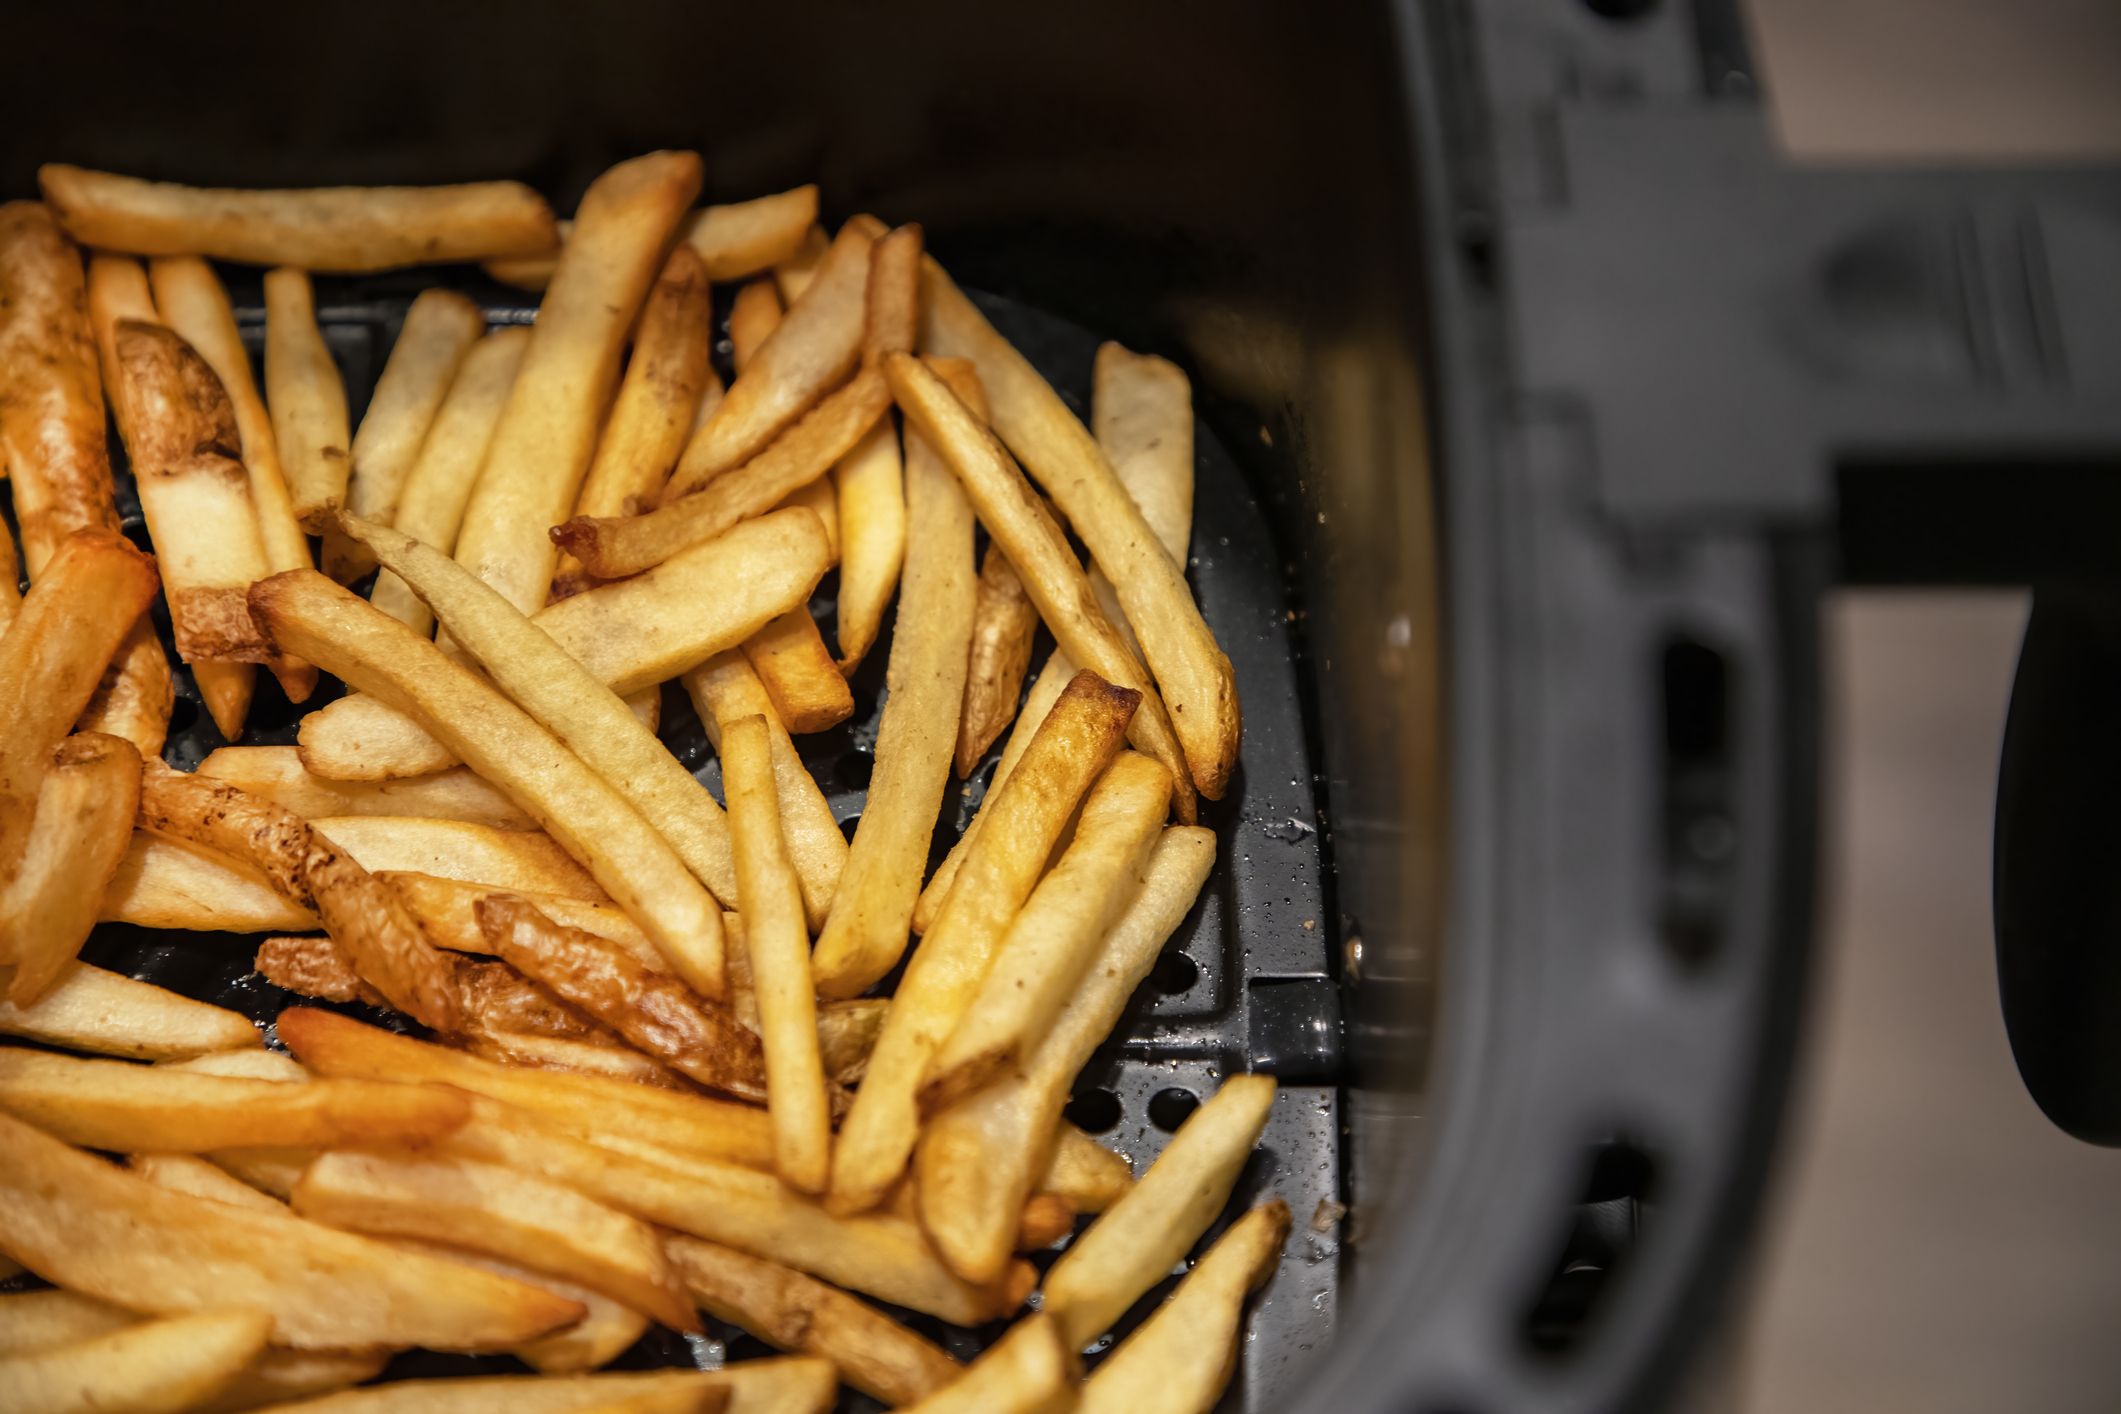 https://hips.hearstapps.com/hmg-prod/images/french-fries-with-airfryer-royalty-free-image-1677270781.jpg